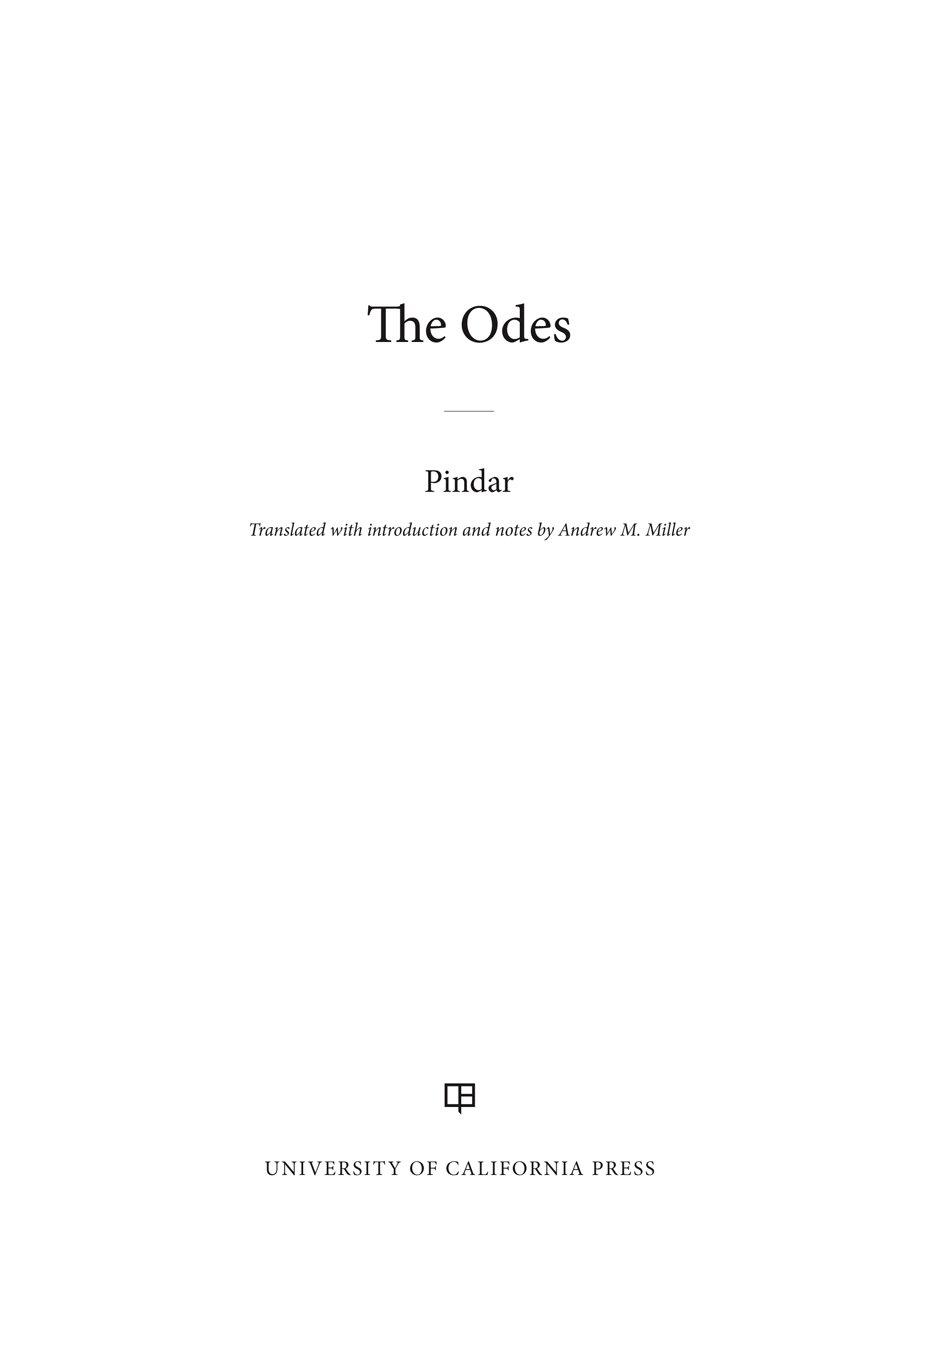 The Odes The Odes Pindar Translated with introduction and notes by Andrew M - photo 1